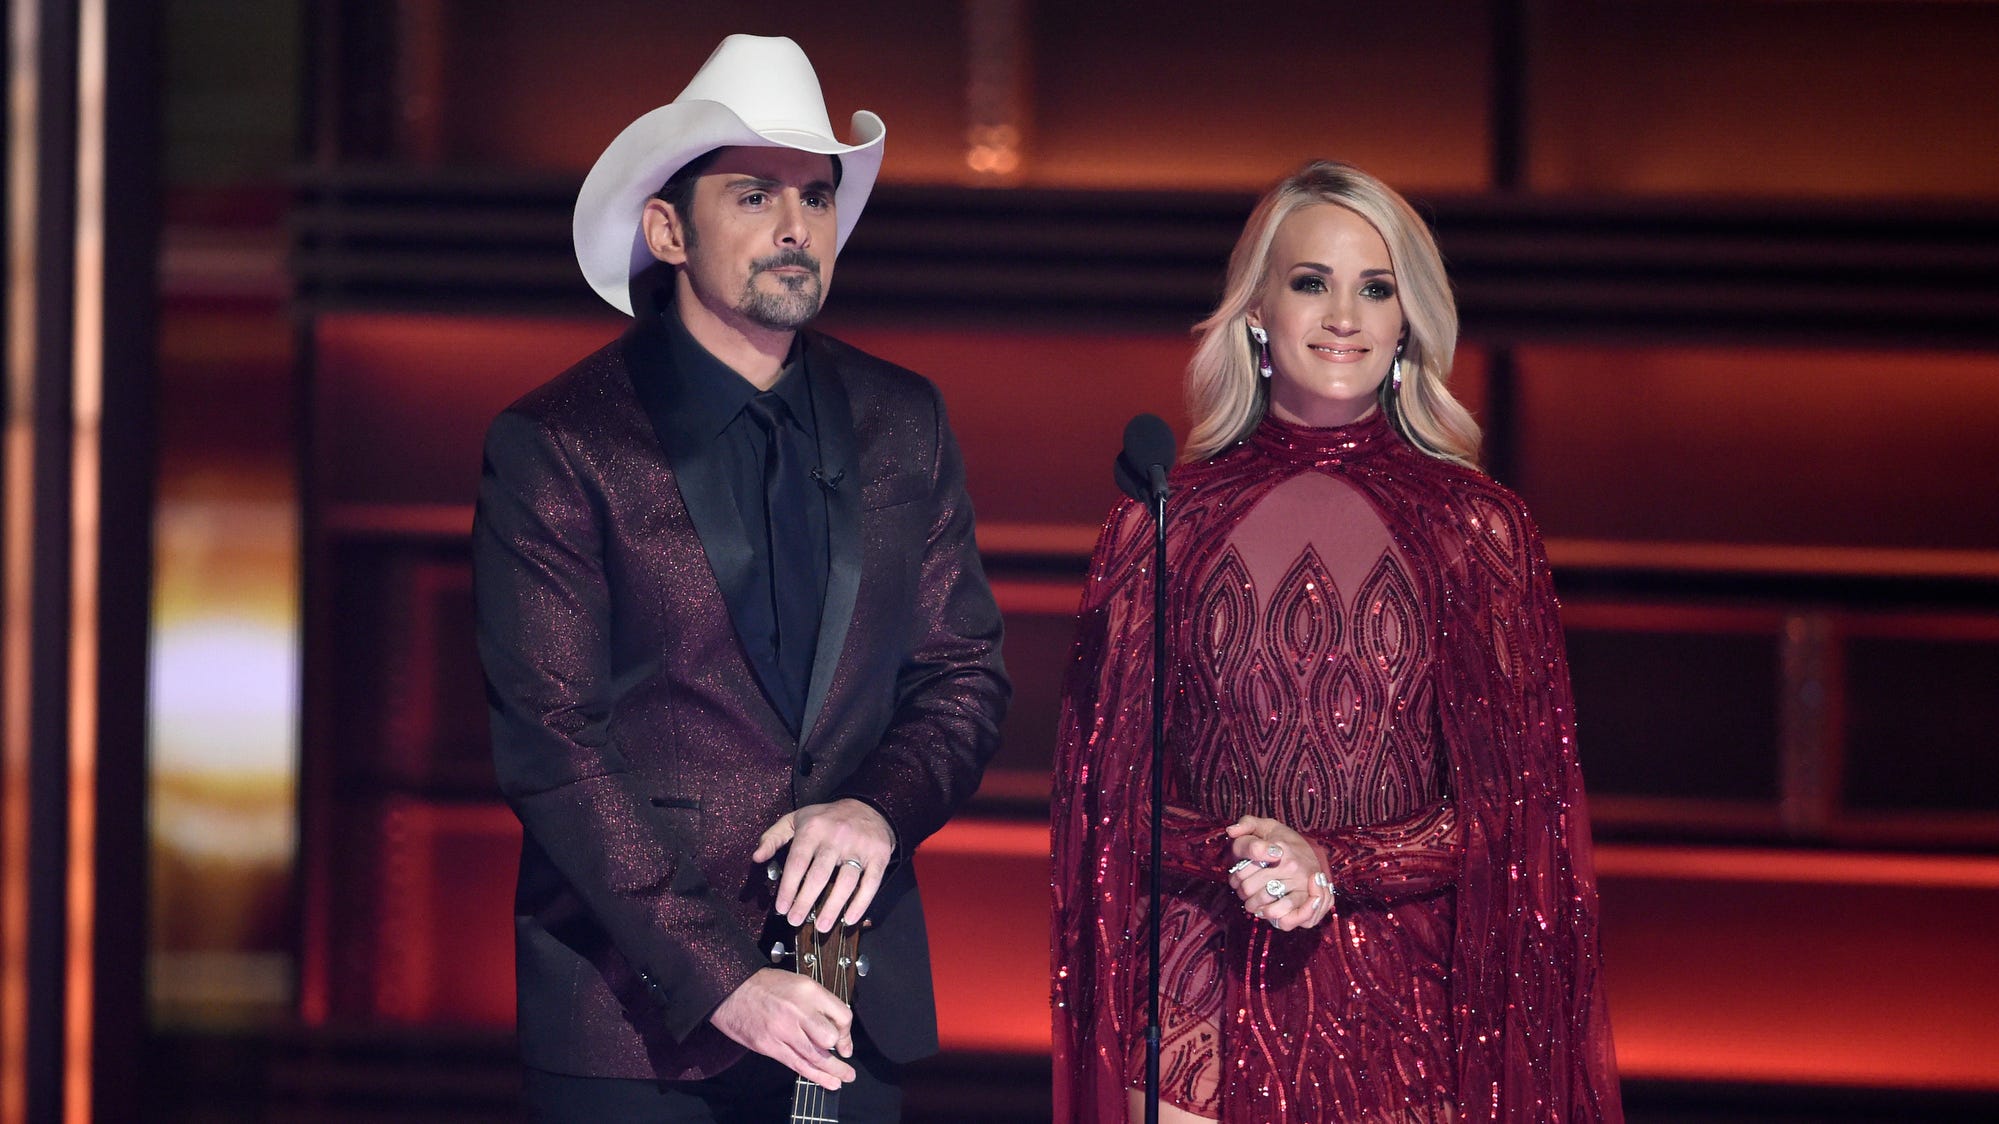 CMA Awards tickets 2018 How much are tickets? Can I still get tickets?